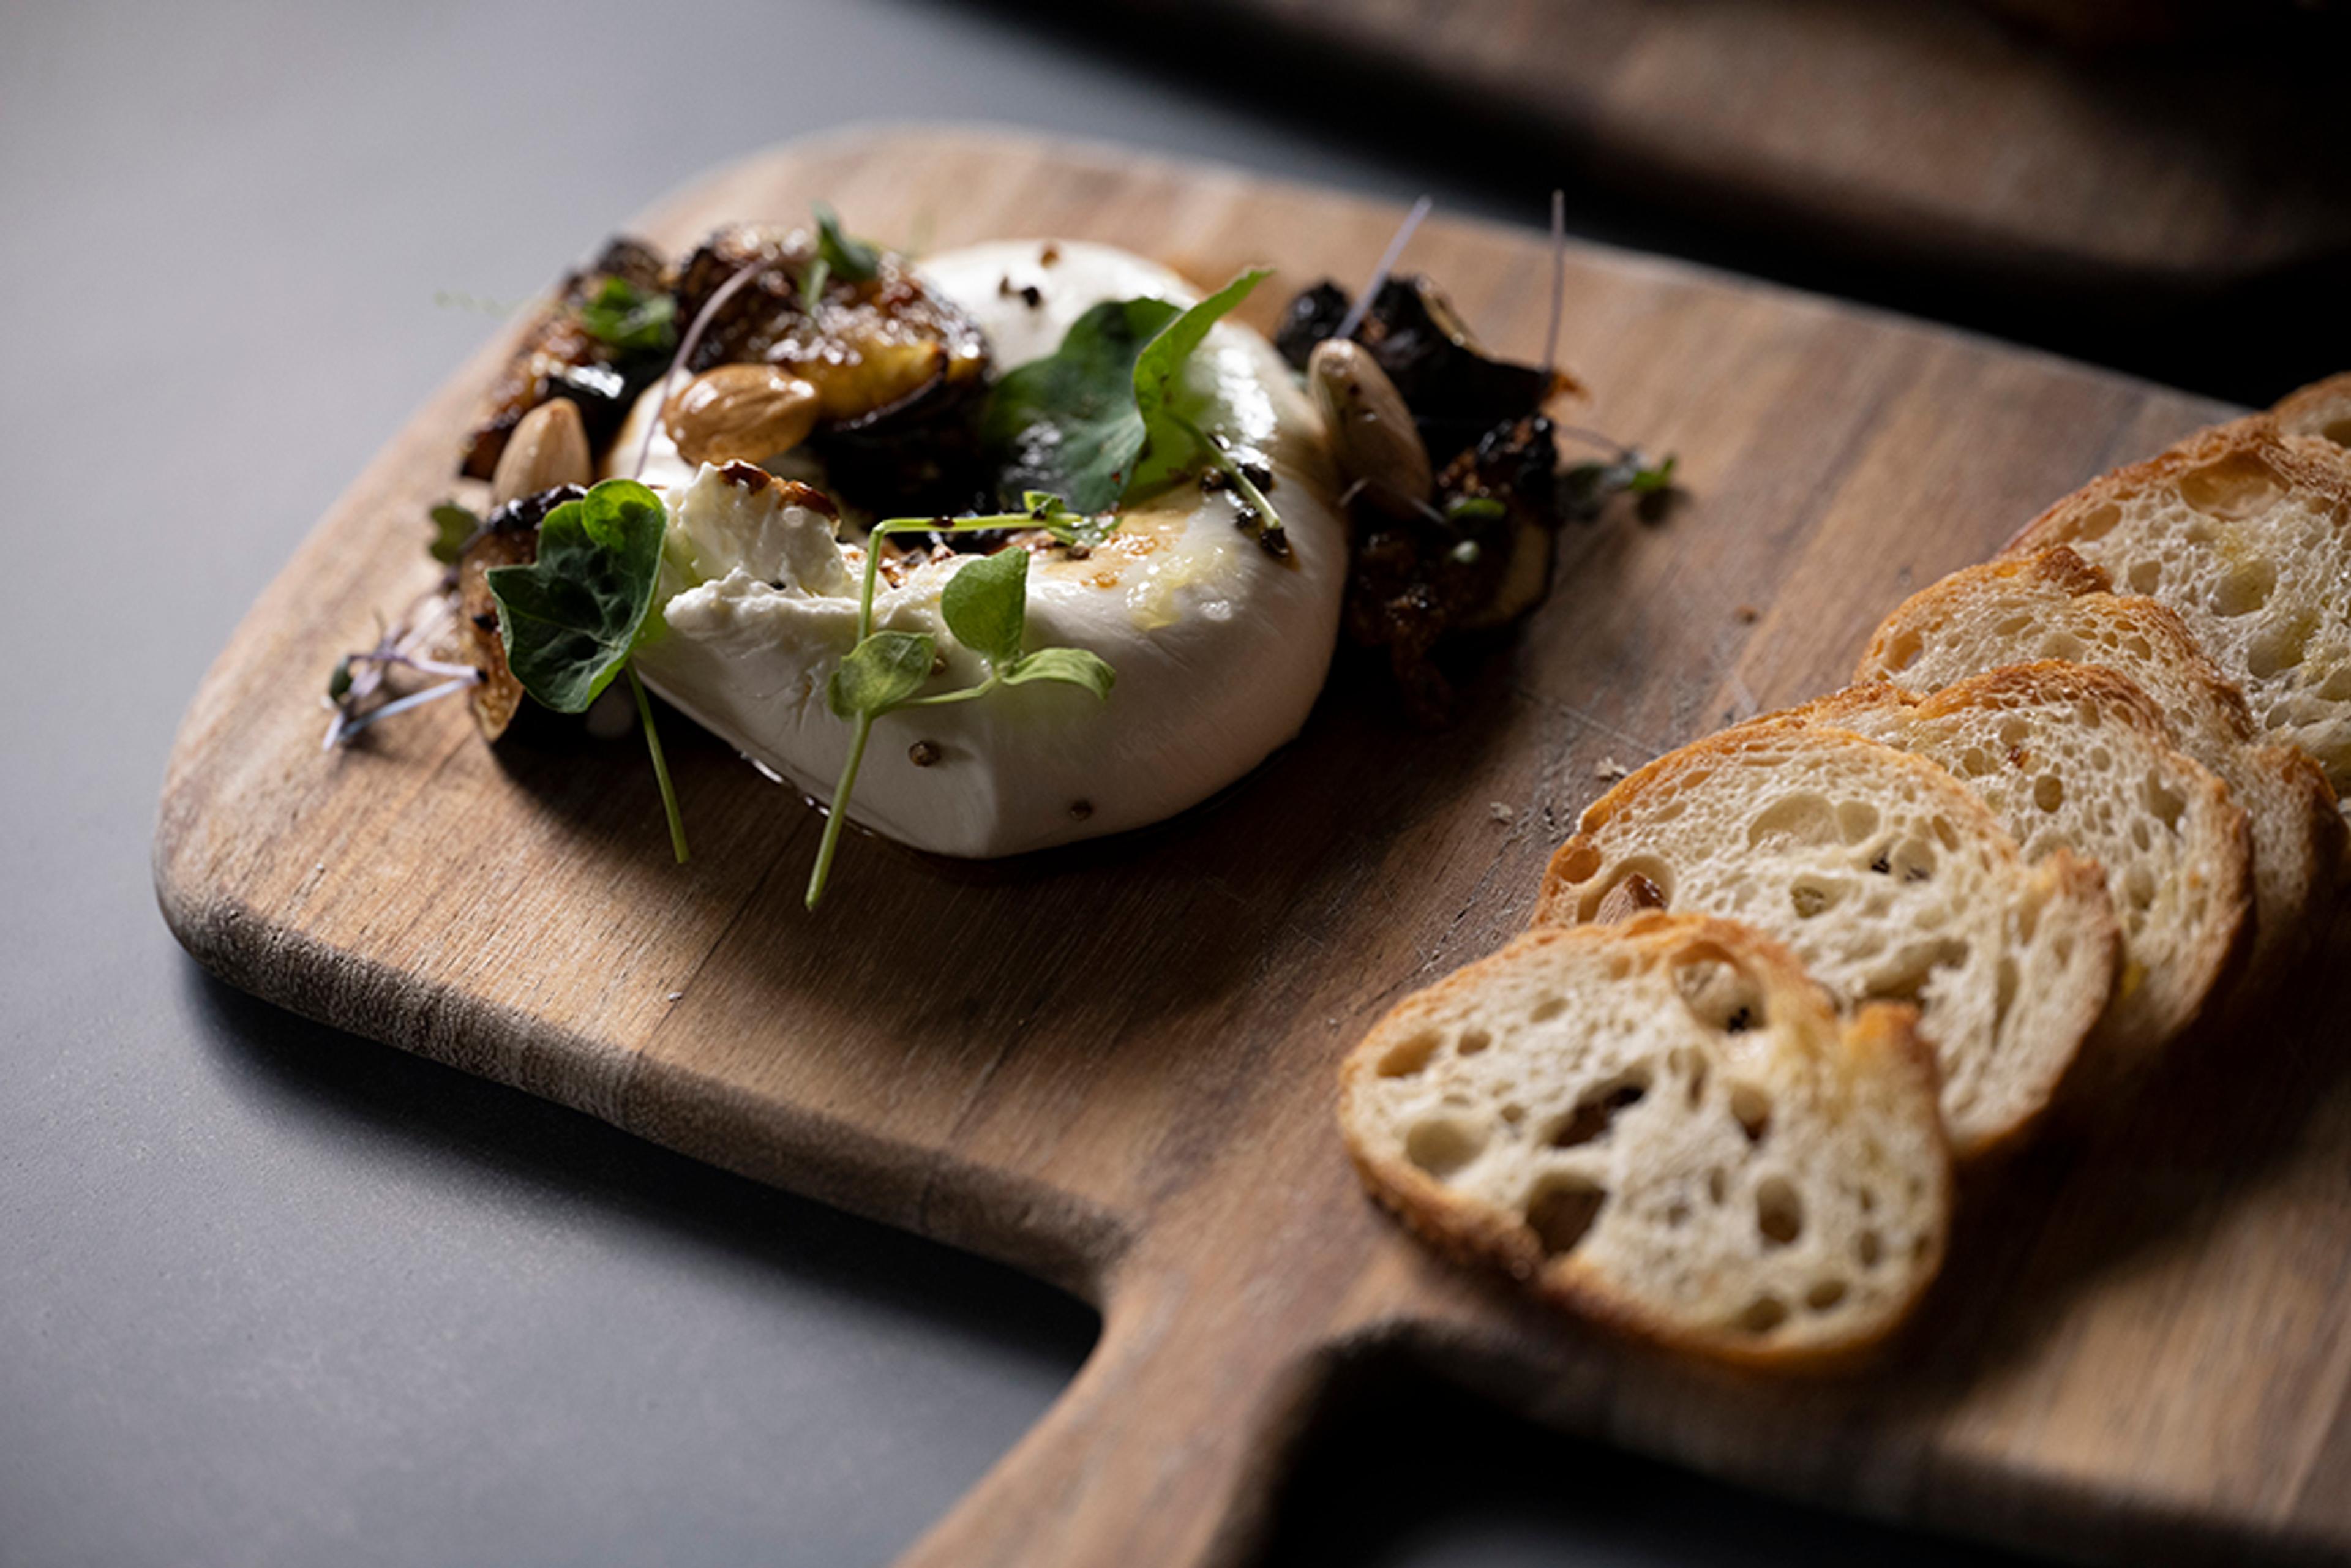 burrata with dates, Marconi almonds, micro greens and toasted crostini